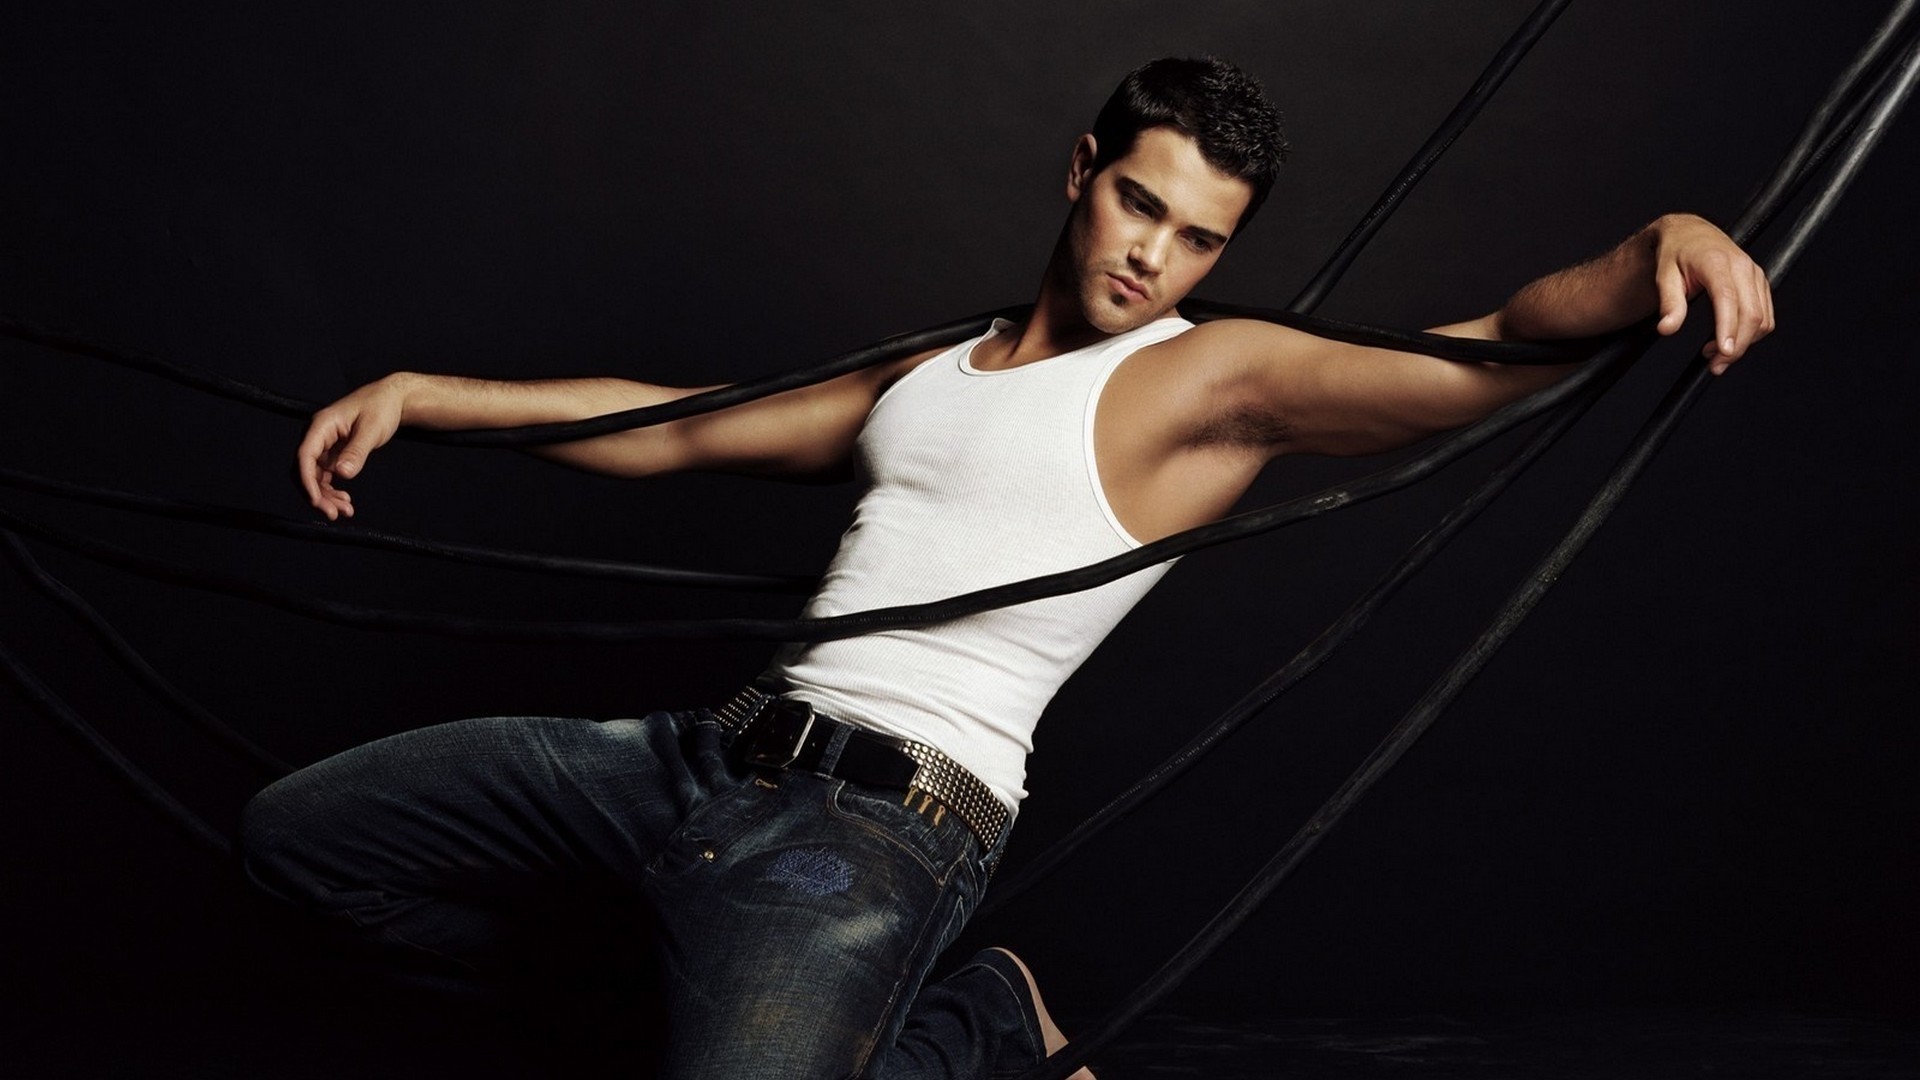 Image: Male, guy, brunet, person, actor, Jesse Metcalfe, t-shirt, white jeans, dark background